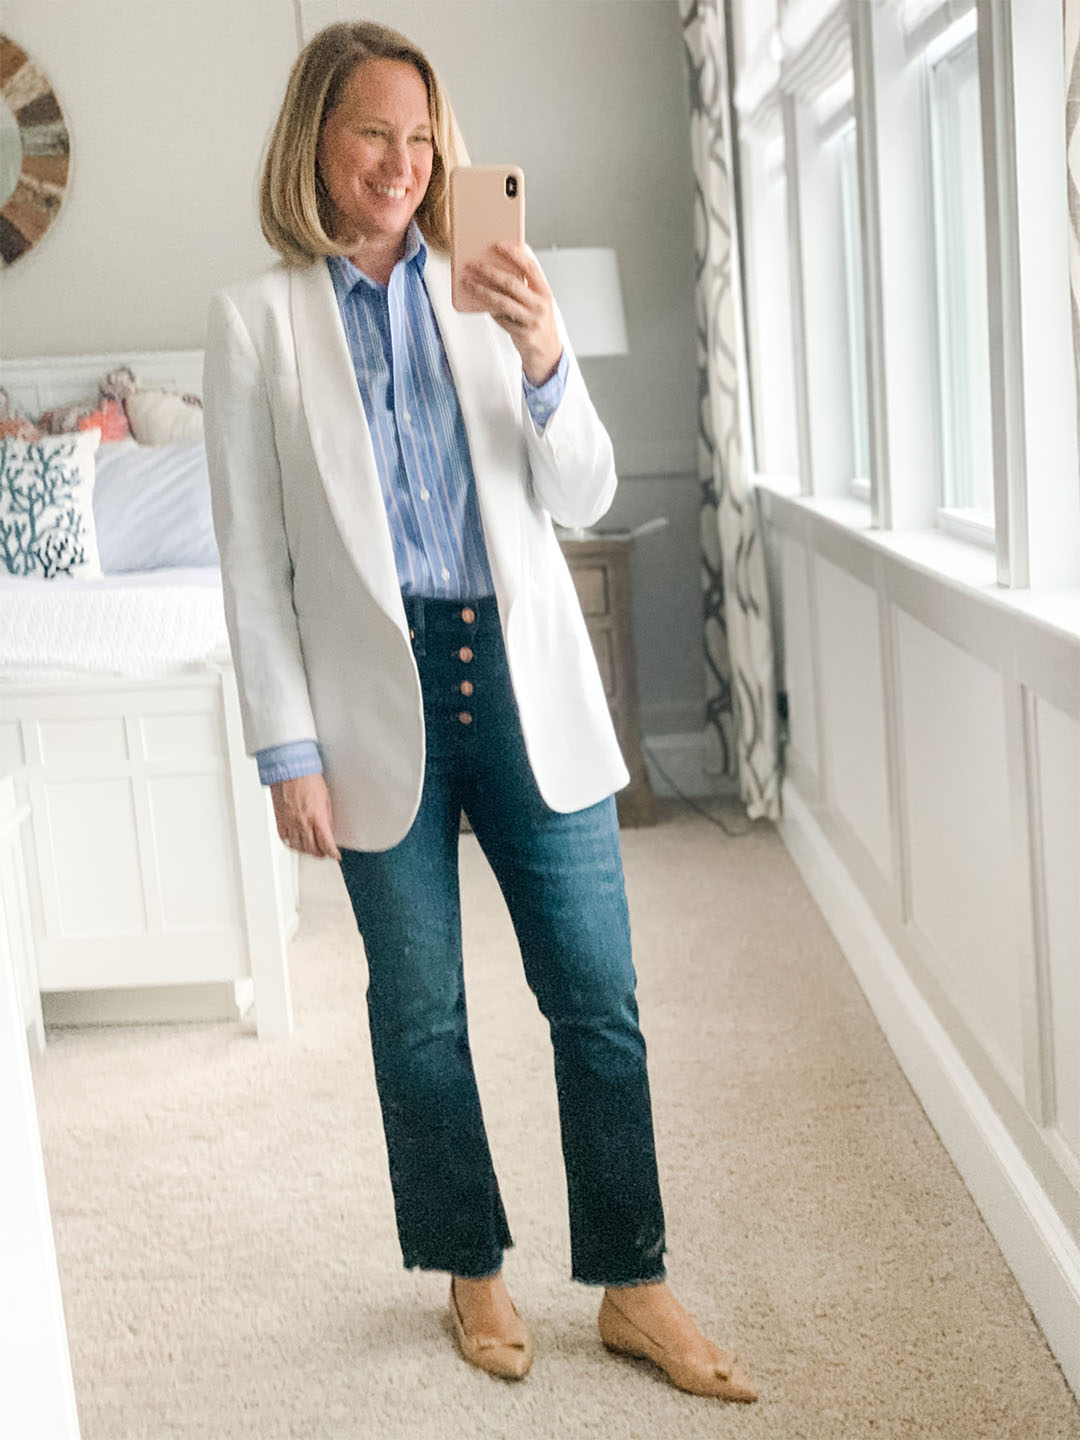 Sarah Flint Natalie ballet flat on woman with jeans, button-up shirt and white blazer